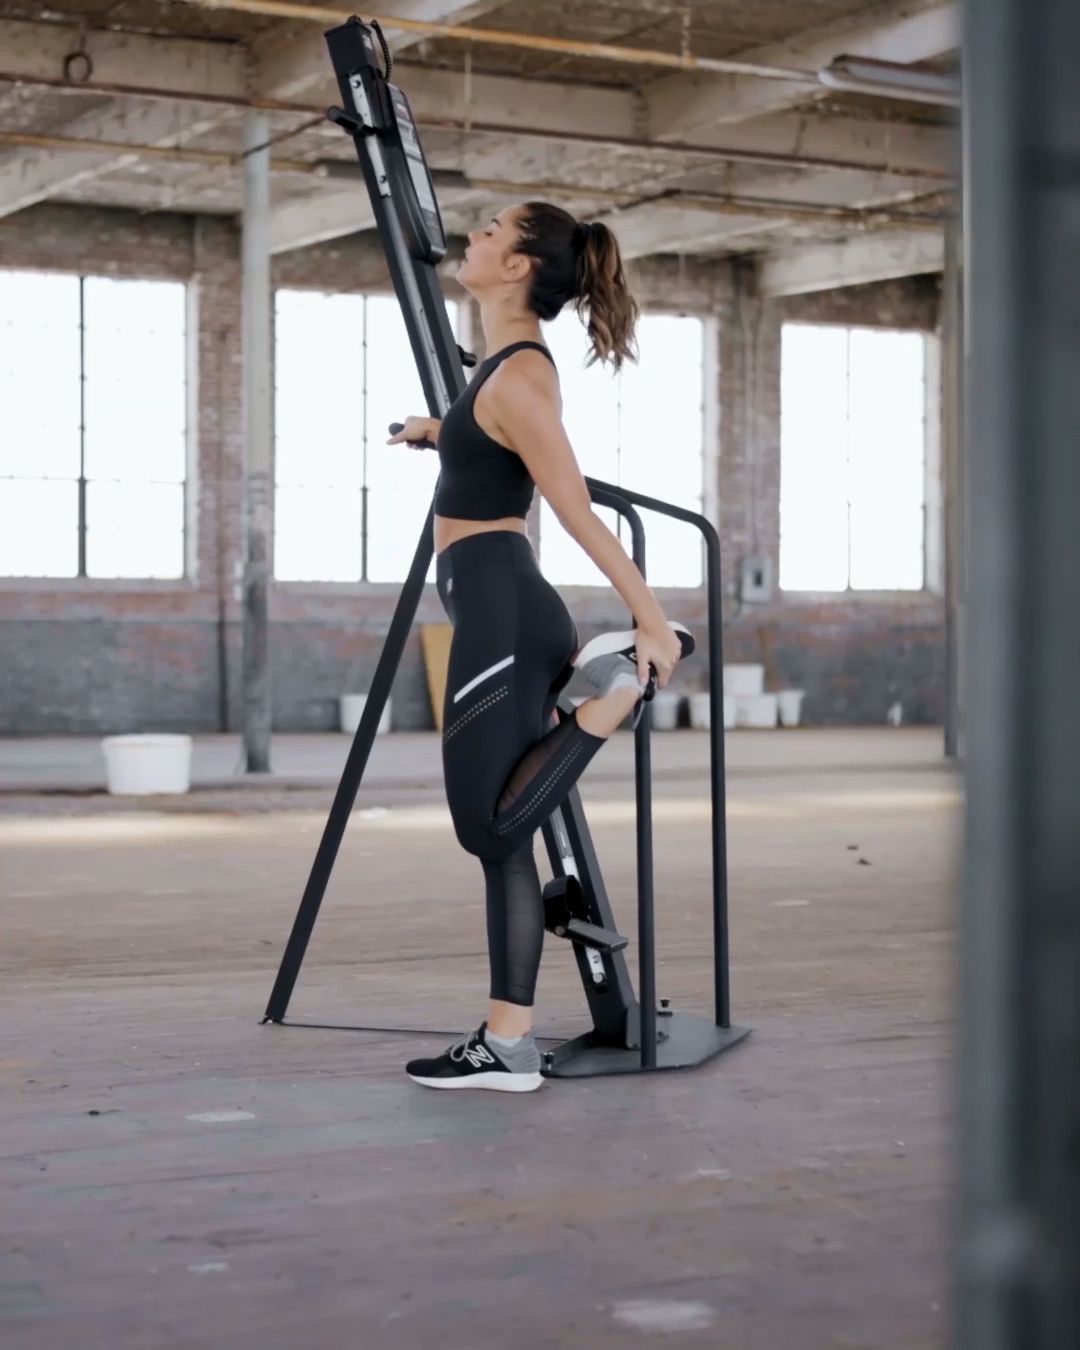 <p>Vertical Climber Workouts: Take Your Fitness To The Next Level</p>
